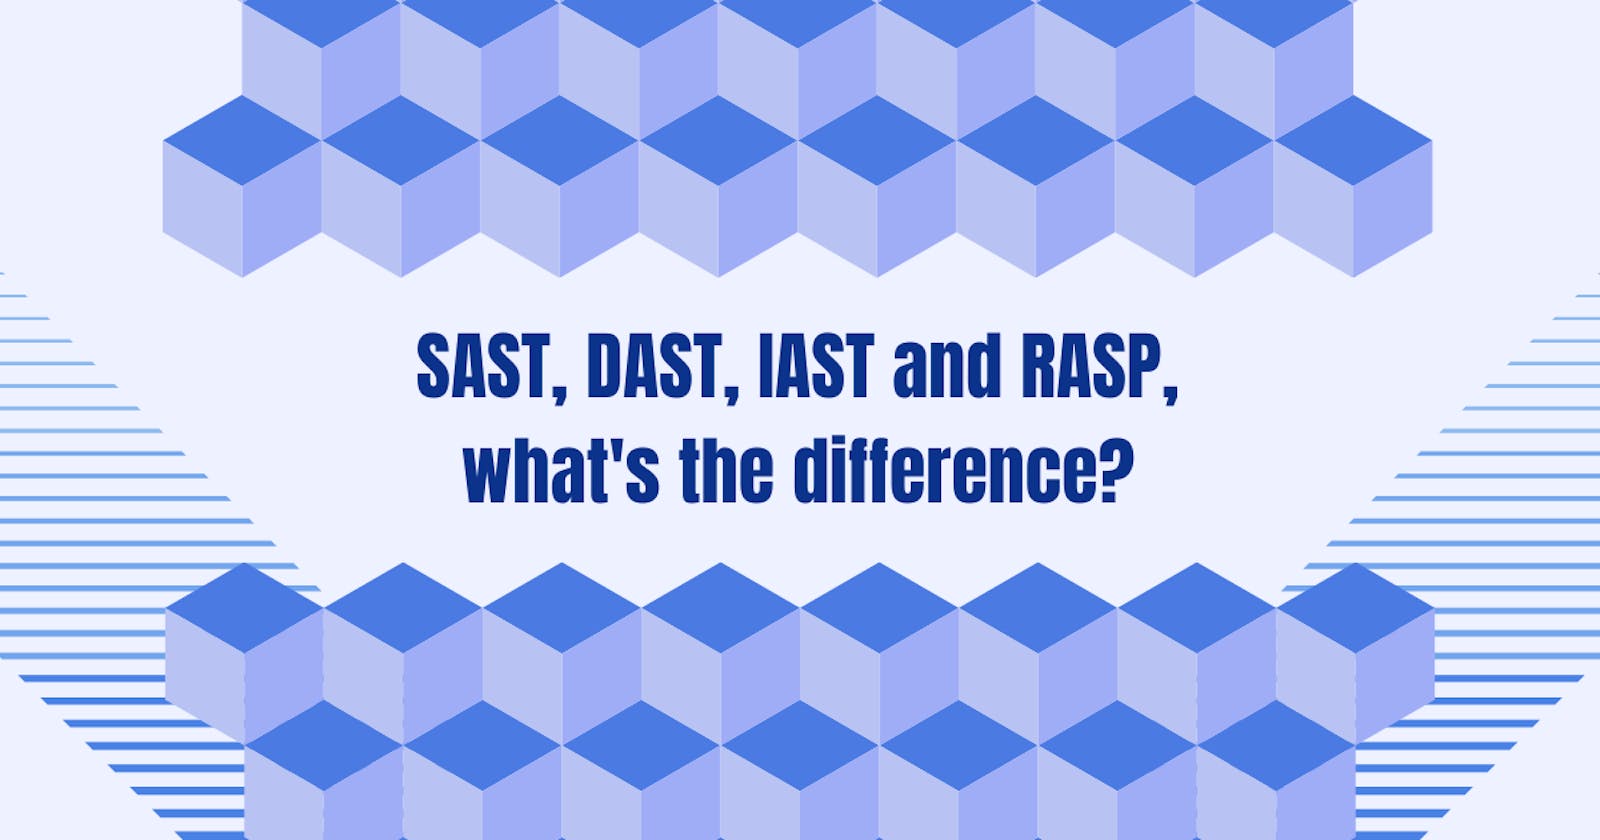 SAST, DAST, IAST and RASP, what's the difference?